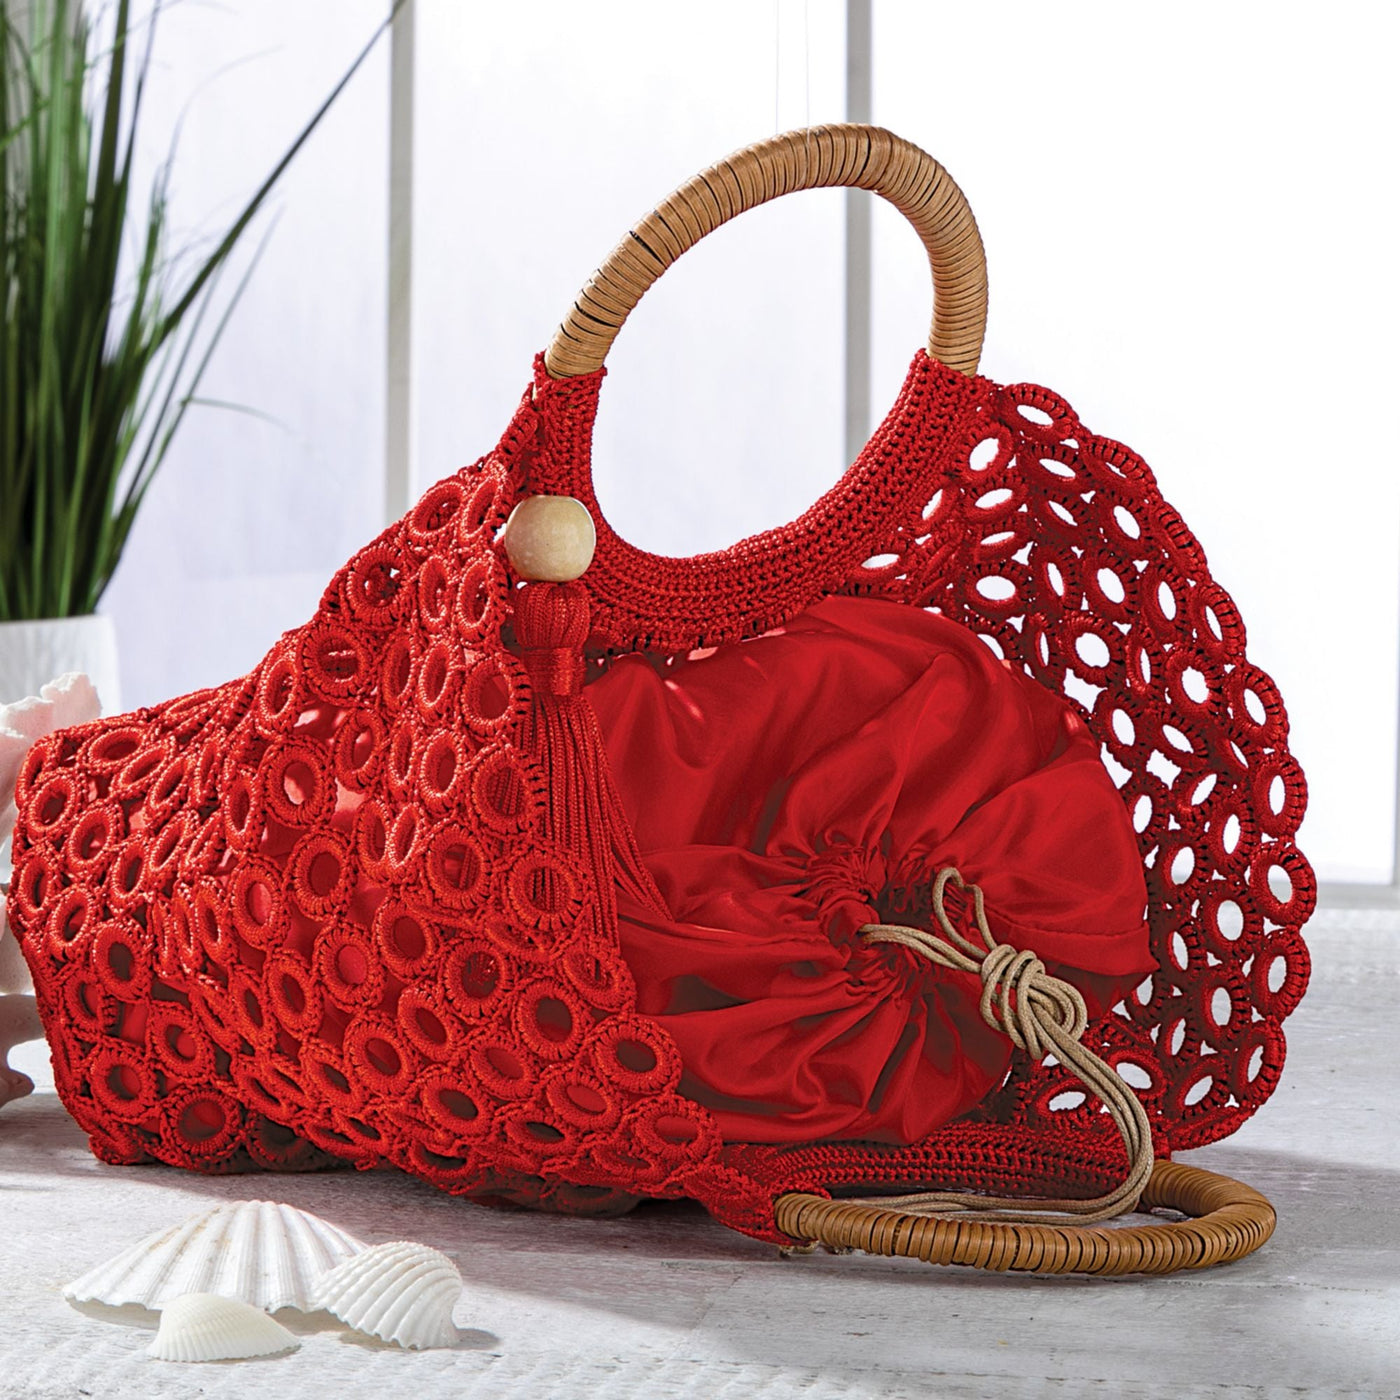 Madame Crocheted Red Tote Bag